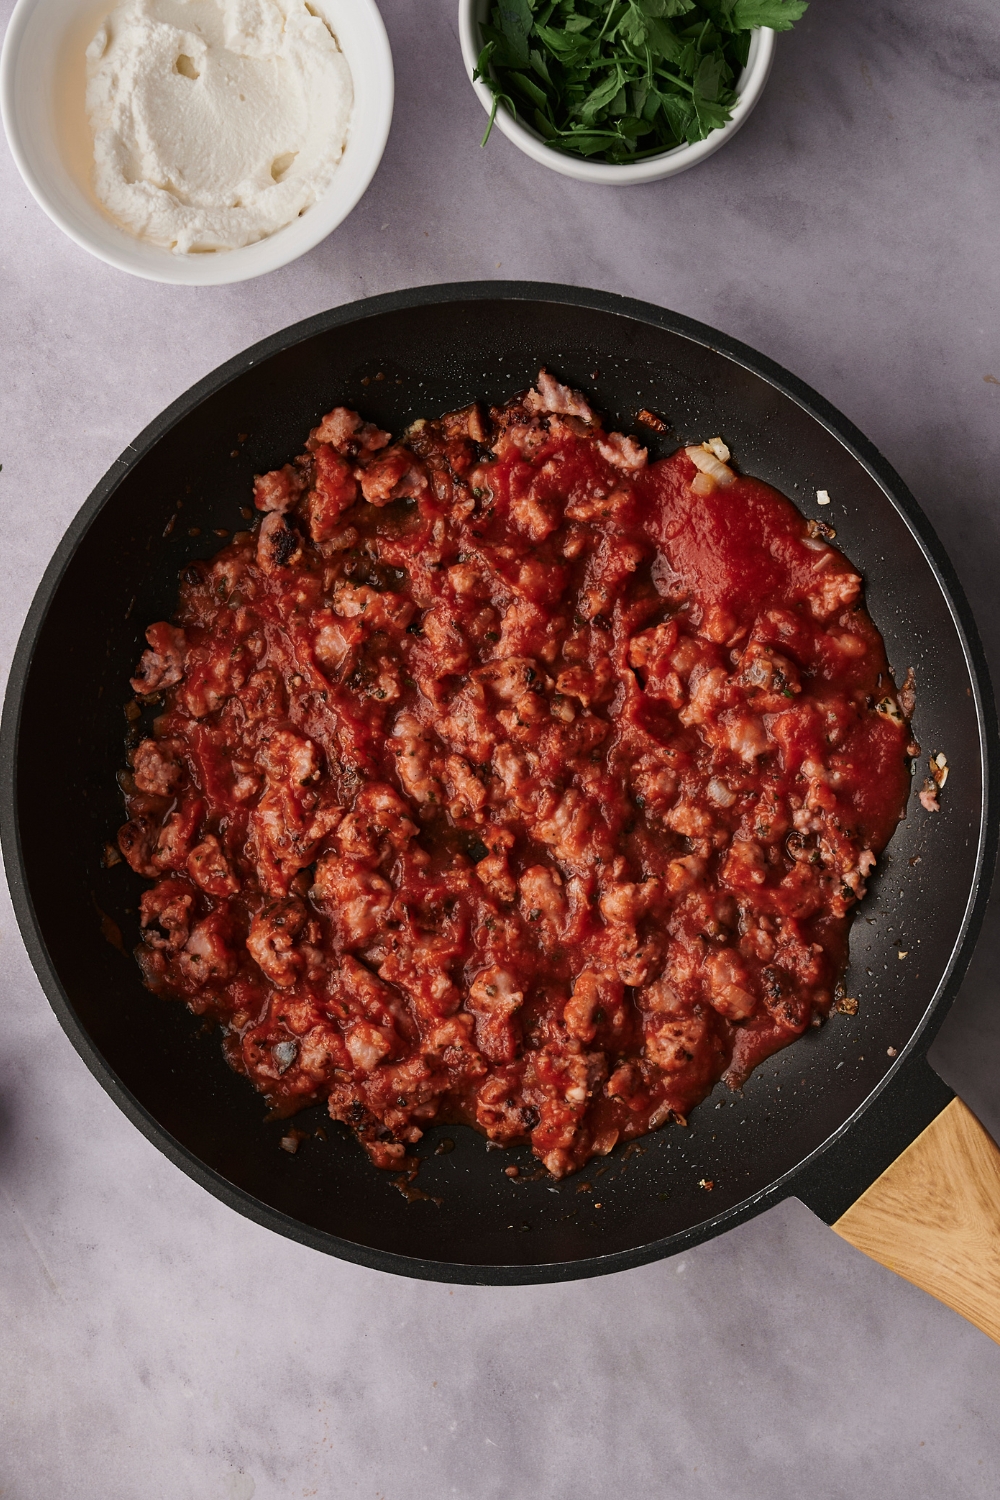 A skillet with cooked sausage, Italian seasonings, and tomato sauce.